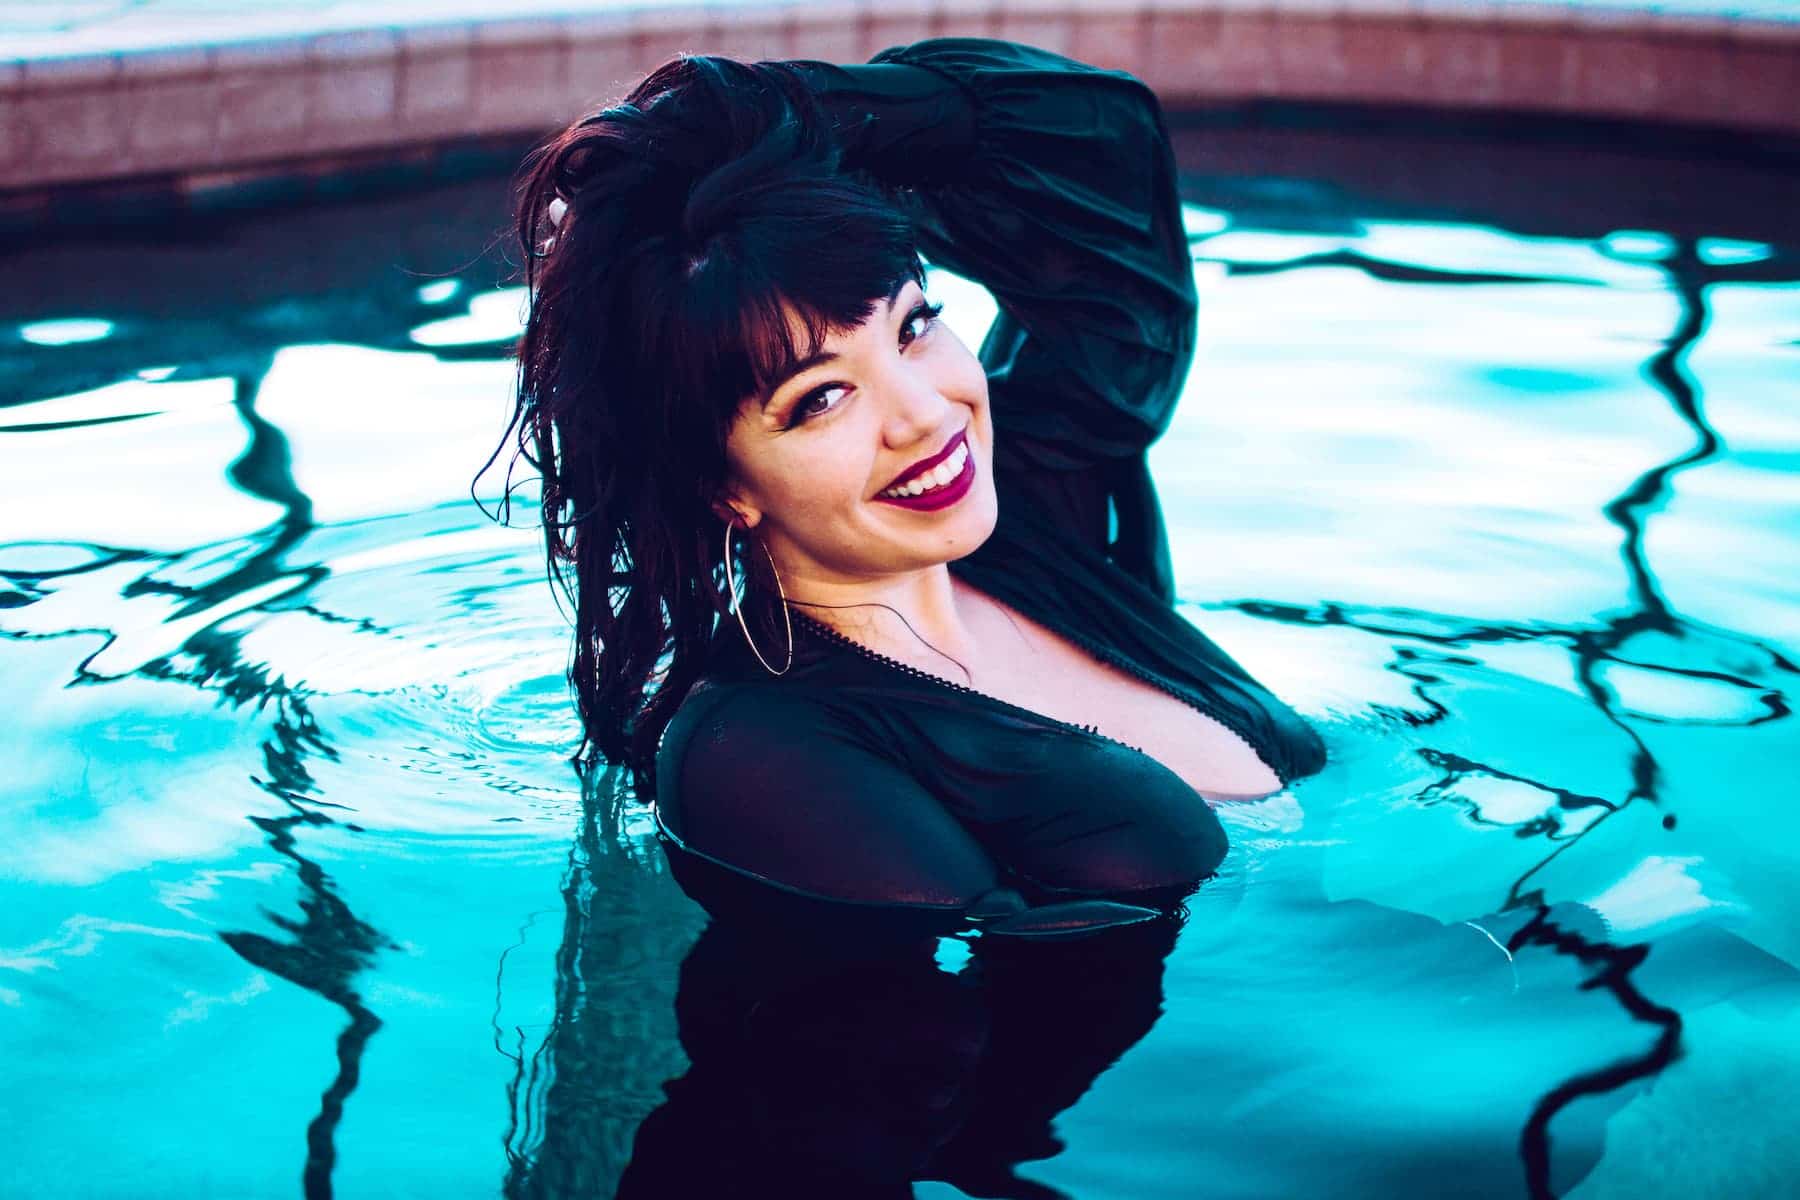 little puck in black dress in pool smiling